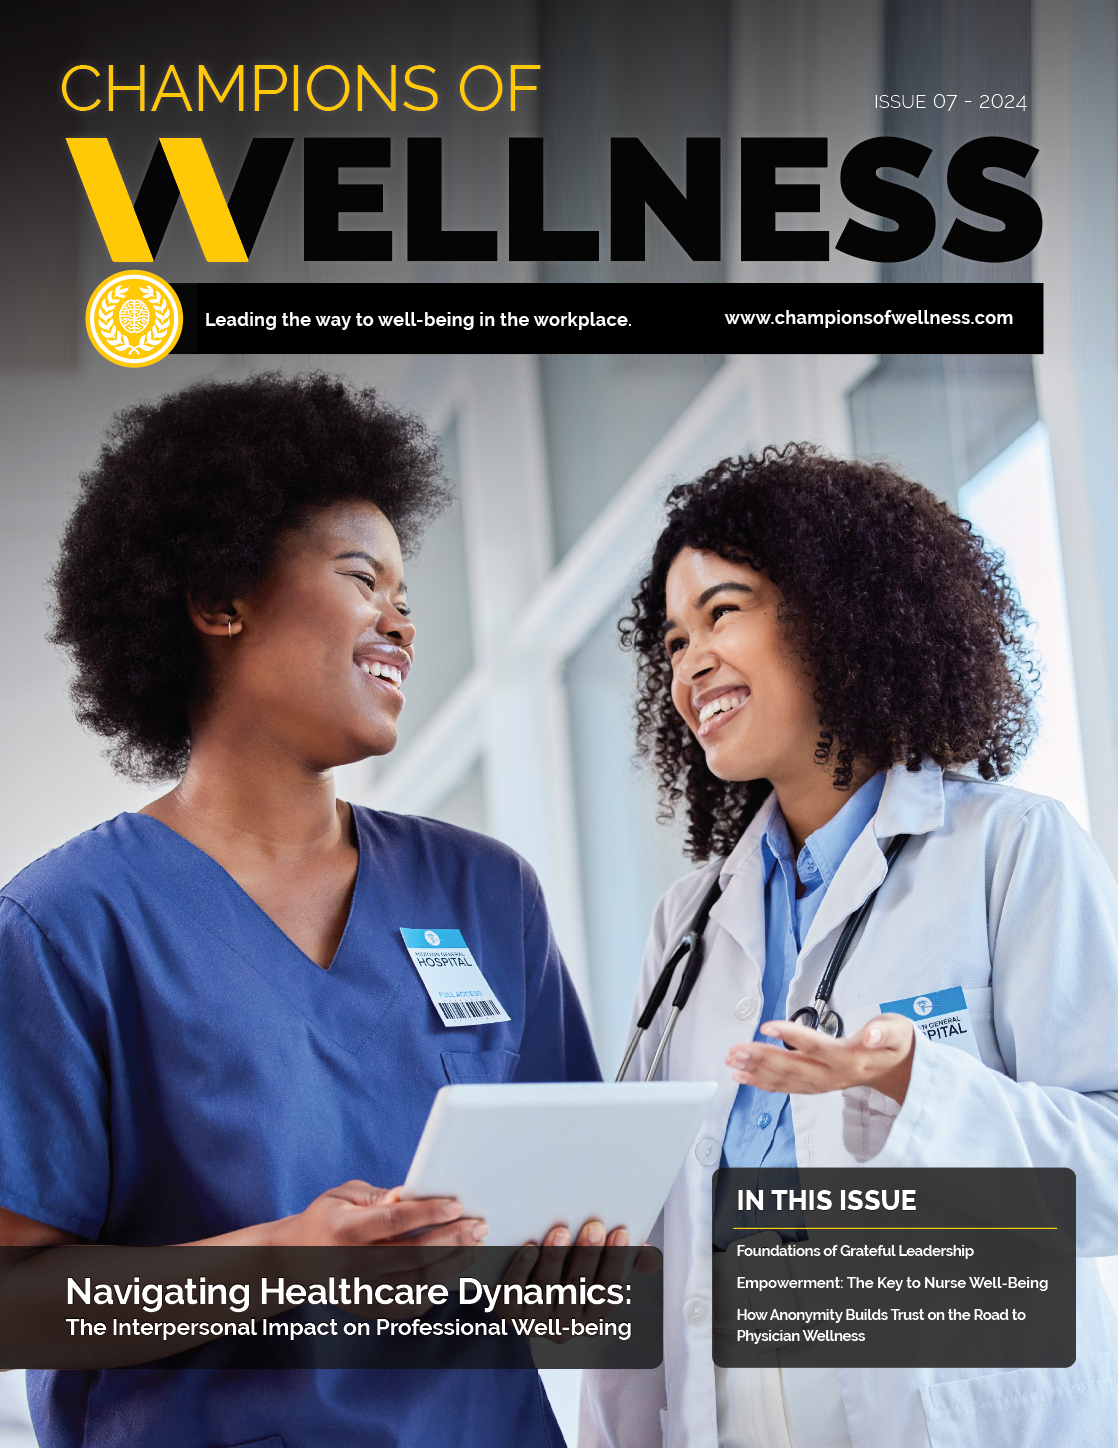 Issue 7 - Champions of Wellness